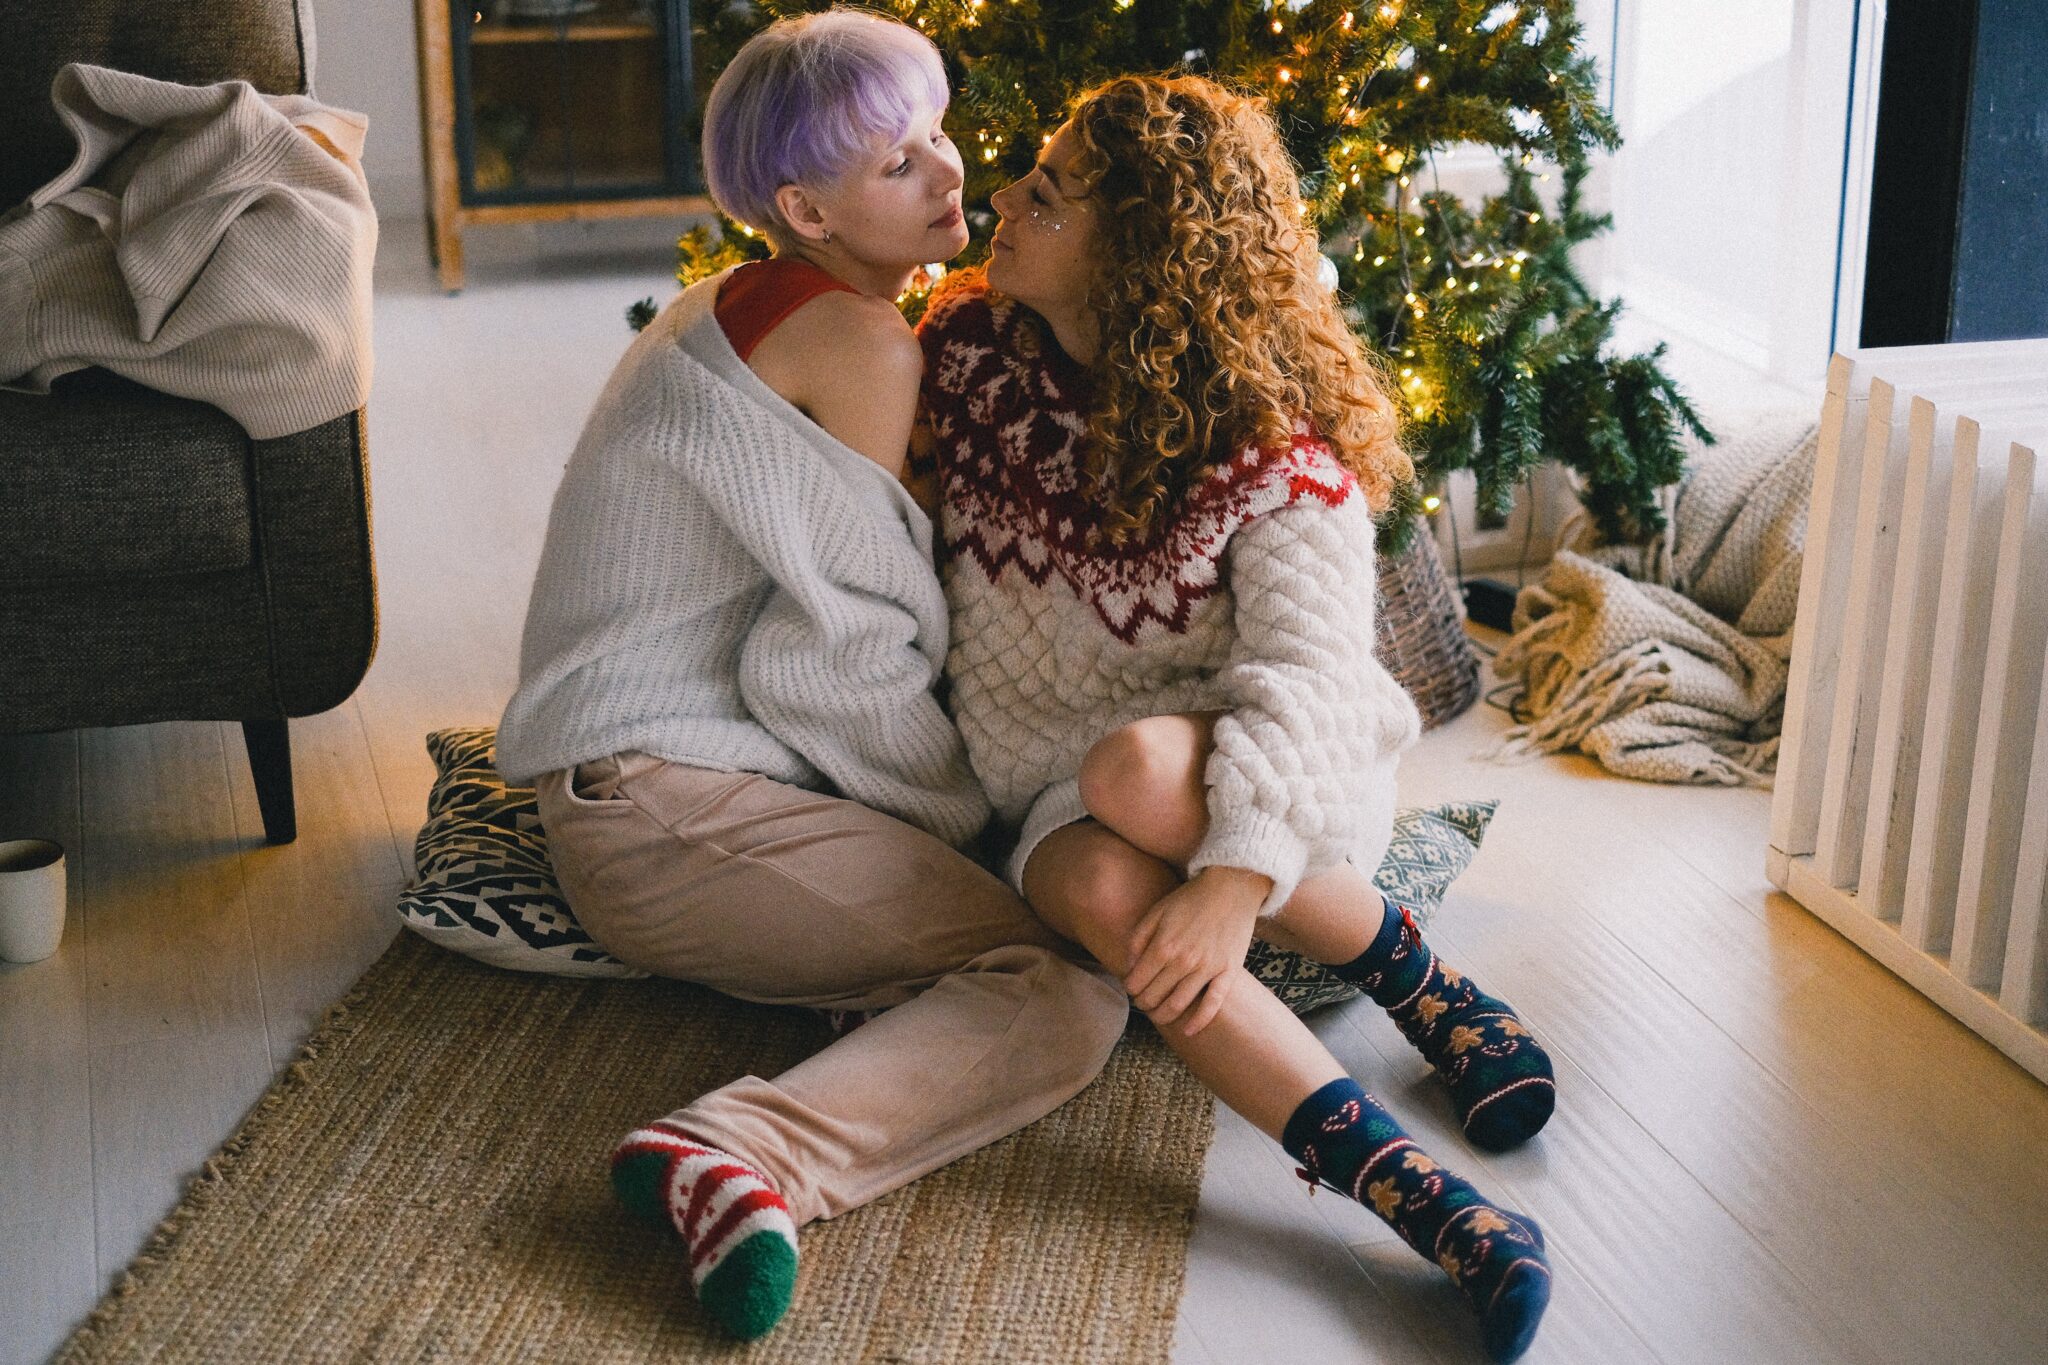 A lesbian couple sitting under a Christmas tree, cuddling and about to kiss.